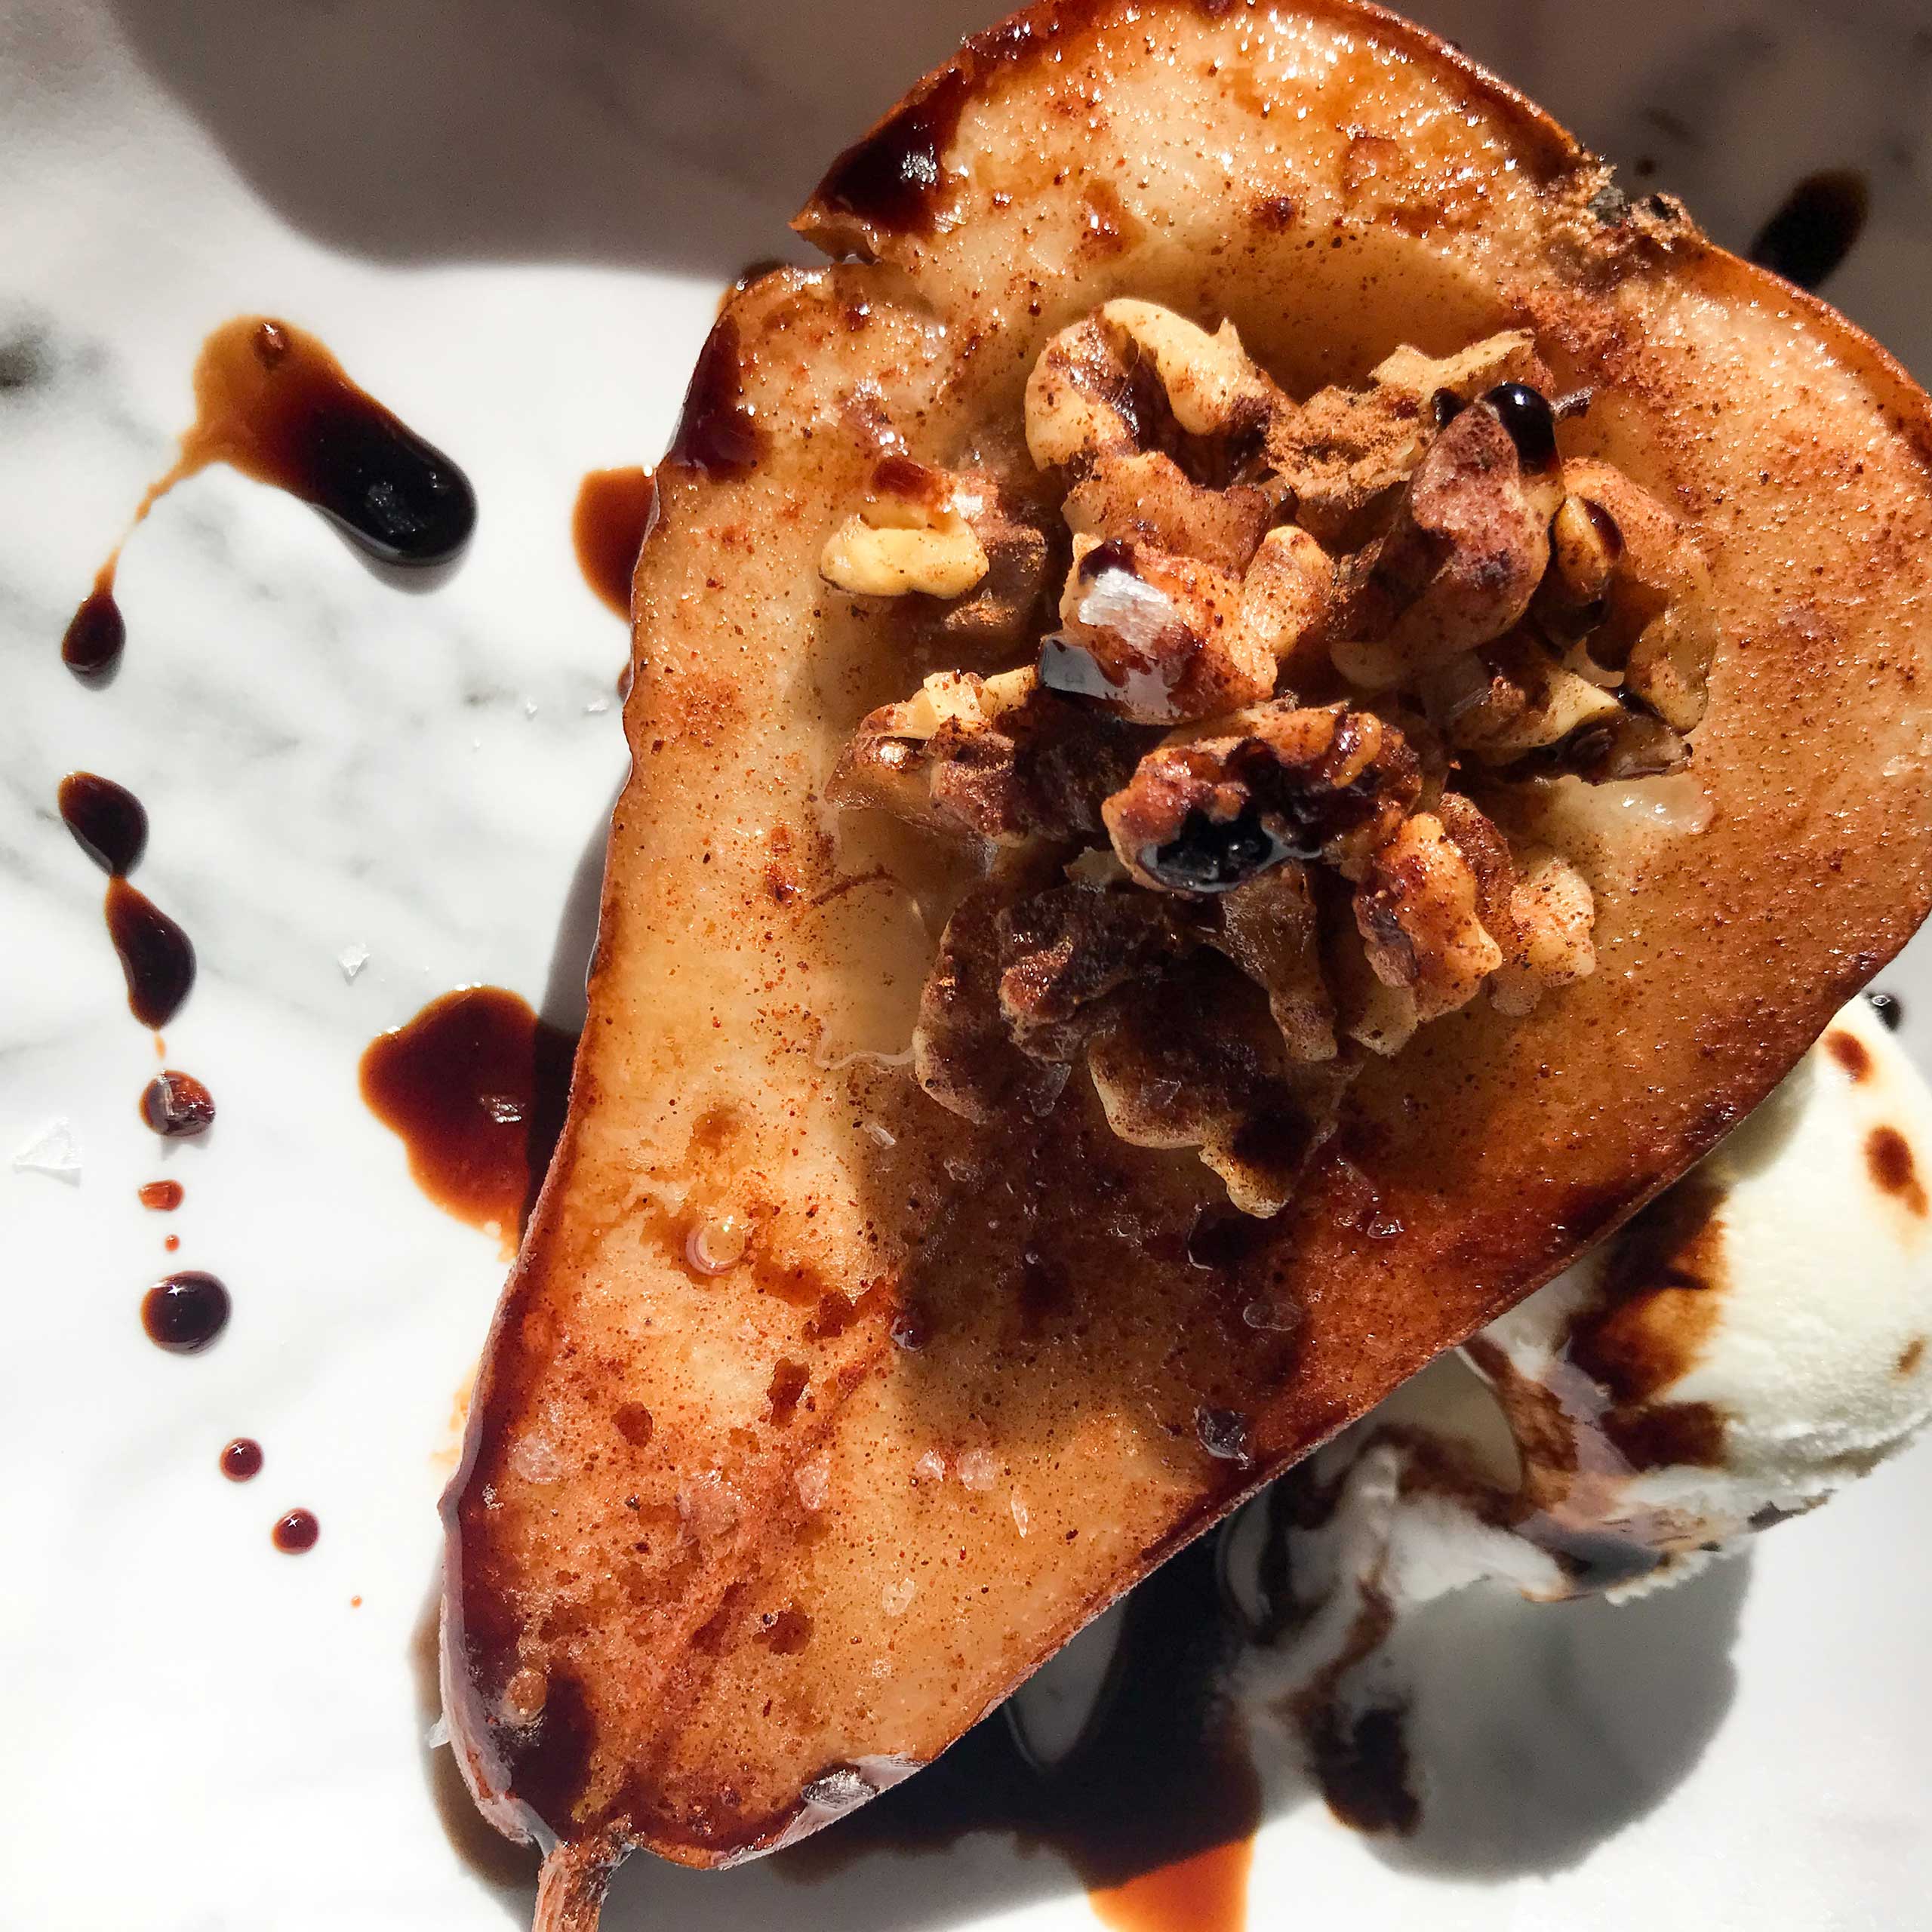 half a pear stuffed with walnuts and drizzled with balsamic vinegar.